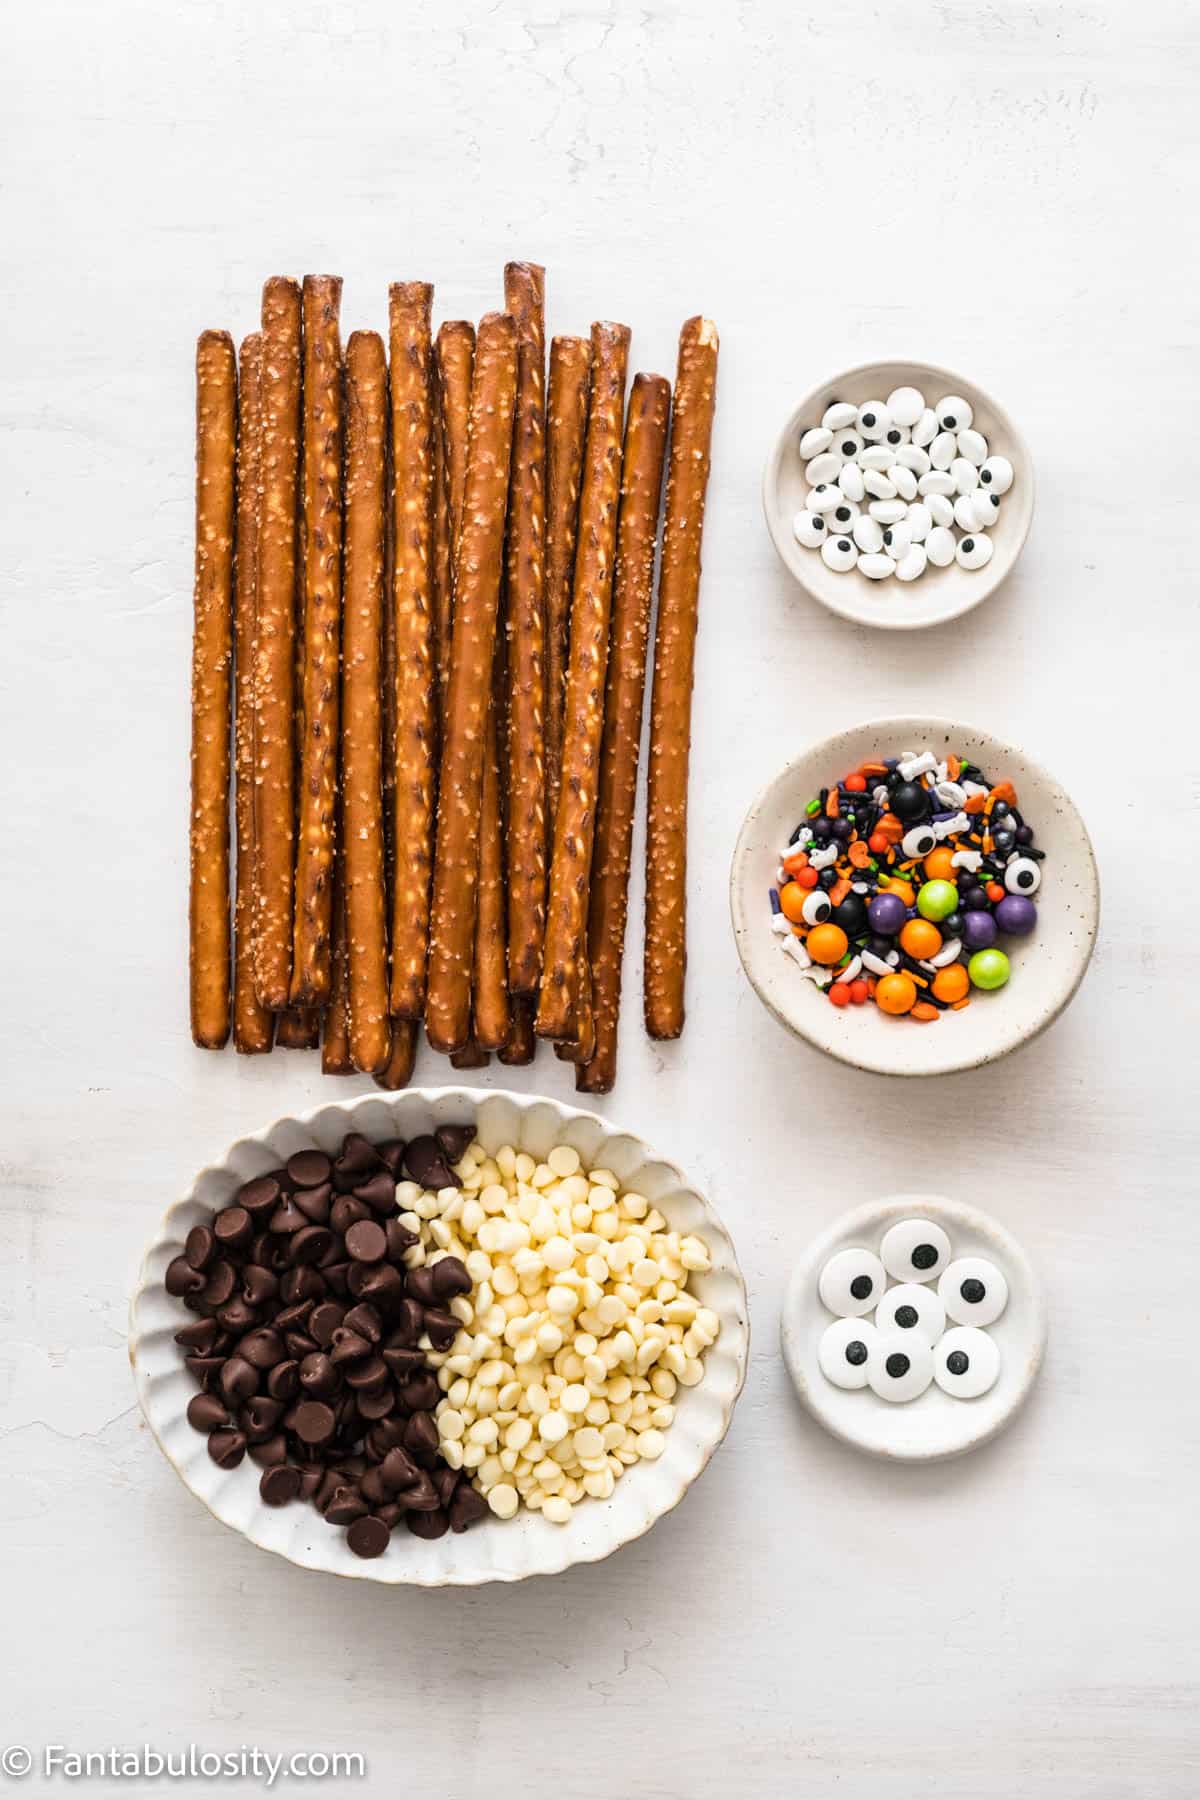 Pretzel rods, a bowl of chocolate chips, candy eyes and Halloween sprinkles are displayed on a white background